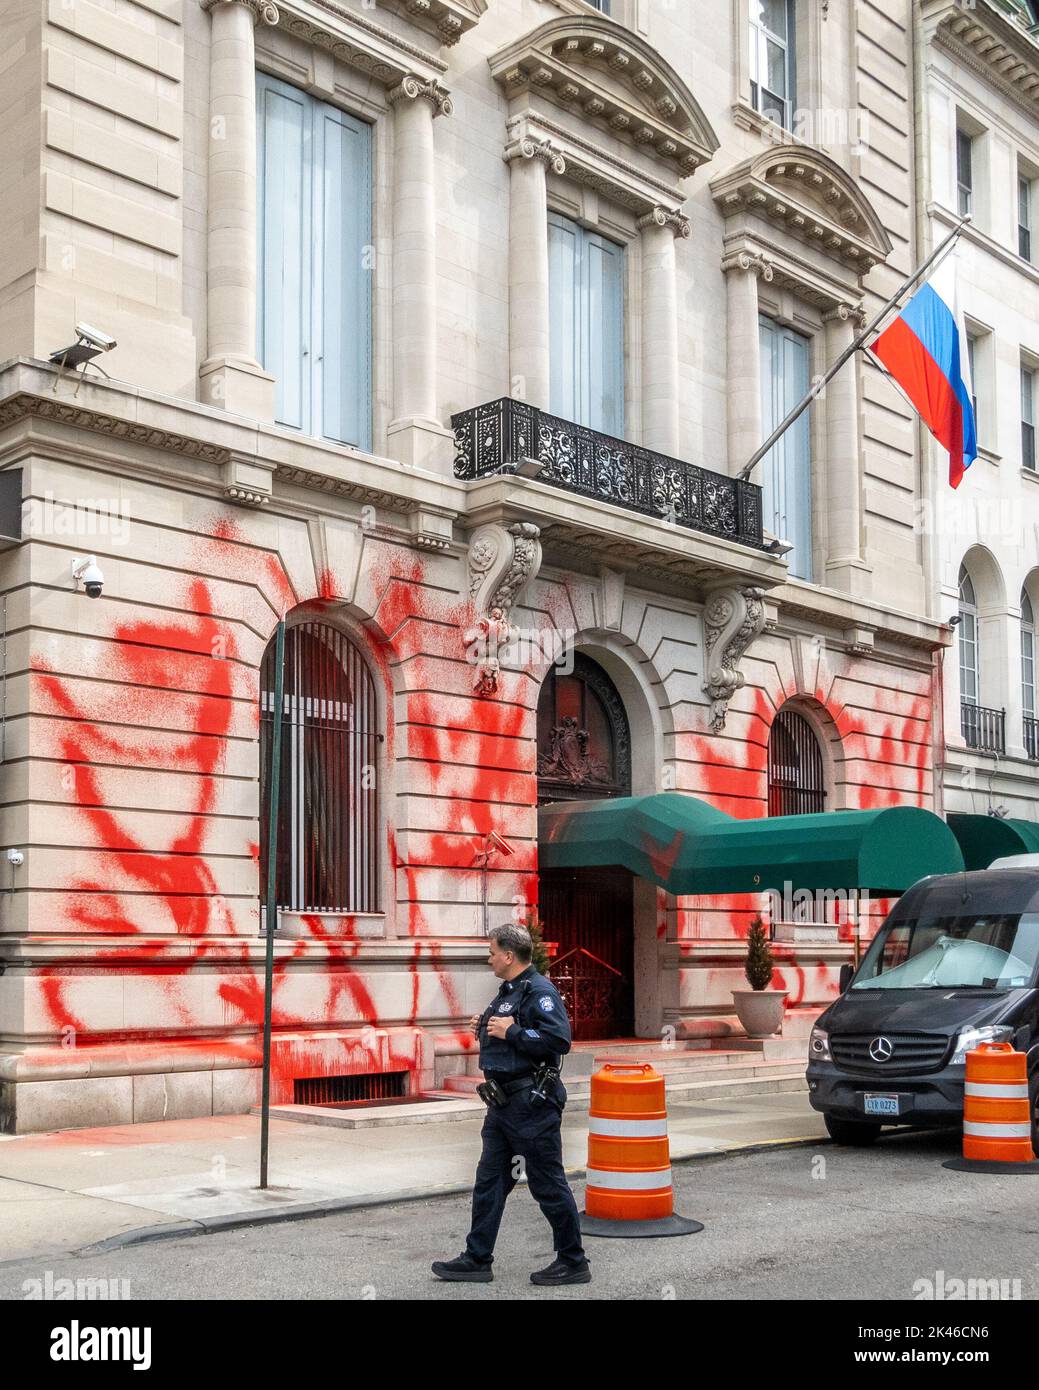 New York, USA. 30th Sep, 2022. A memeber of the Antiterrorism group of the New York Police Department keeps guard in front of the Russian Consulate General after the building appearead vandalized with red paint hours before Russian president Vladimir Putin announced the annexation of four regions of Ukraine, a move that sparked global outrage and was widely dennounced as illegal by the United Nations. Credit: Enrique Shore/Alamy Live News Stock Photo